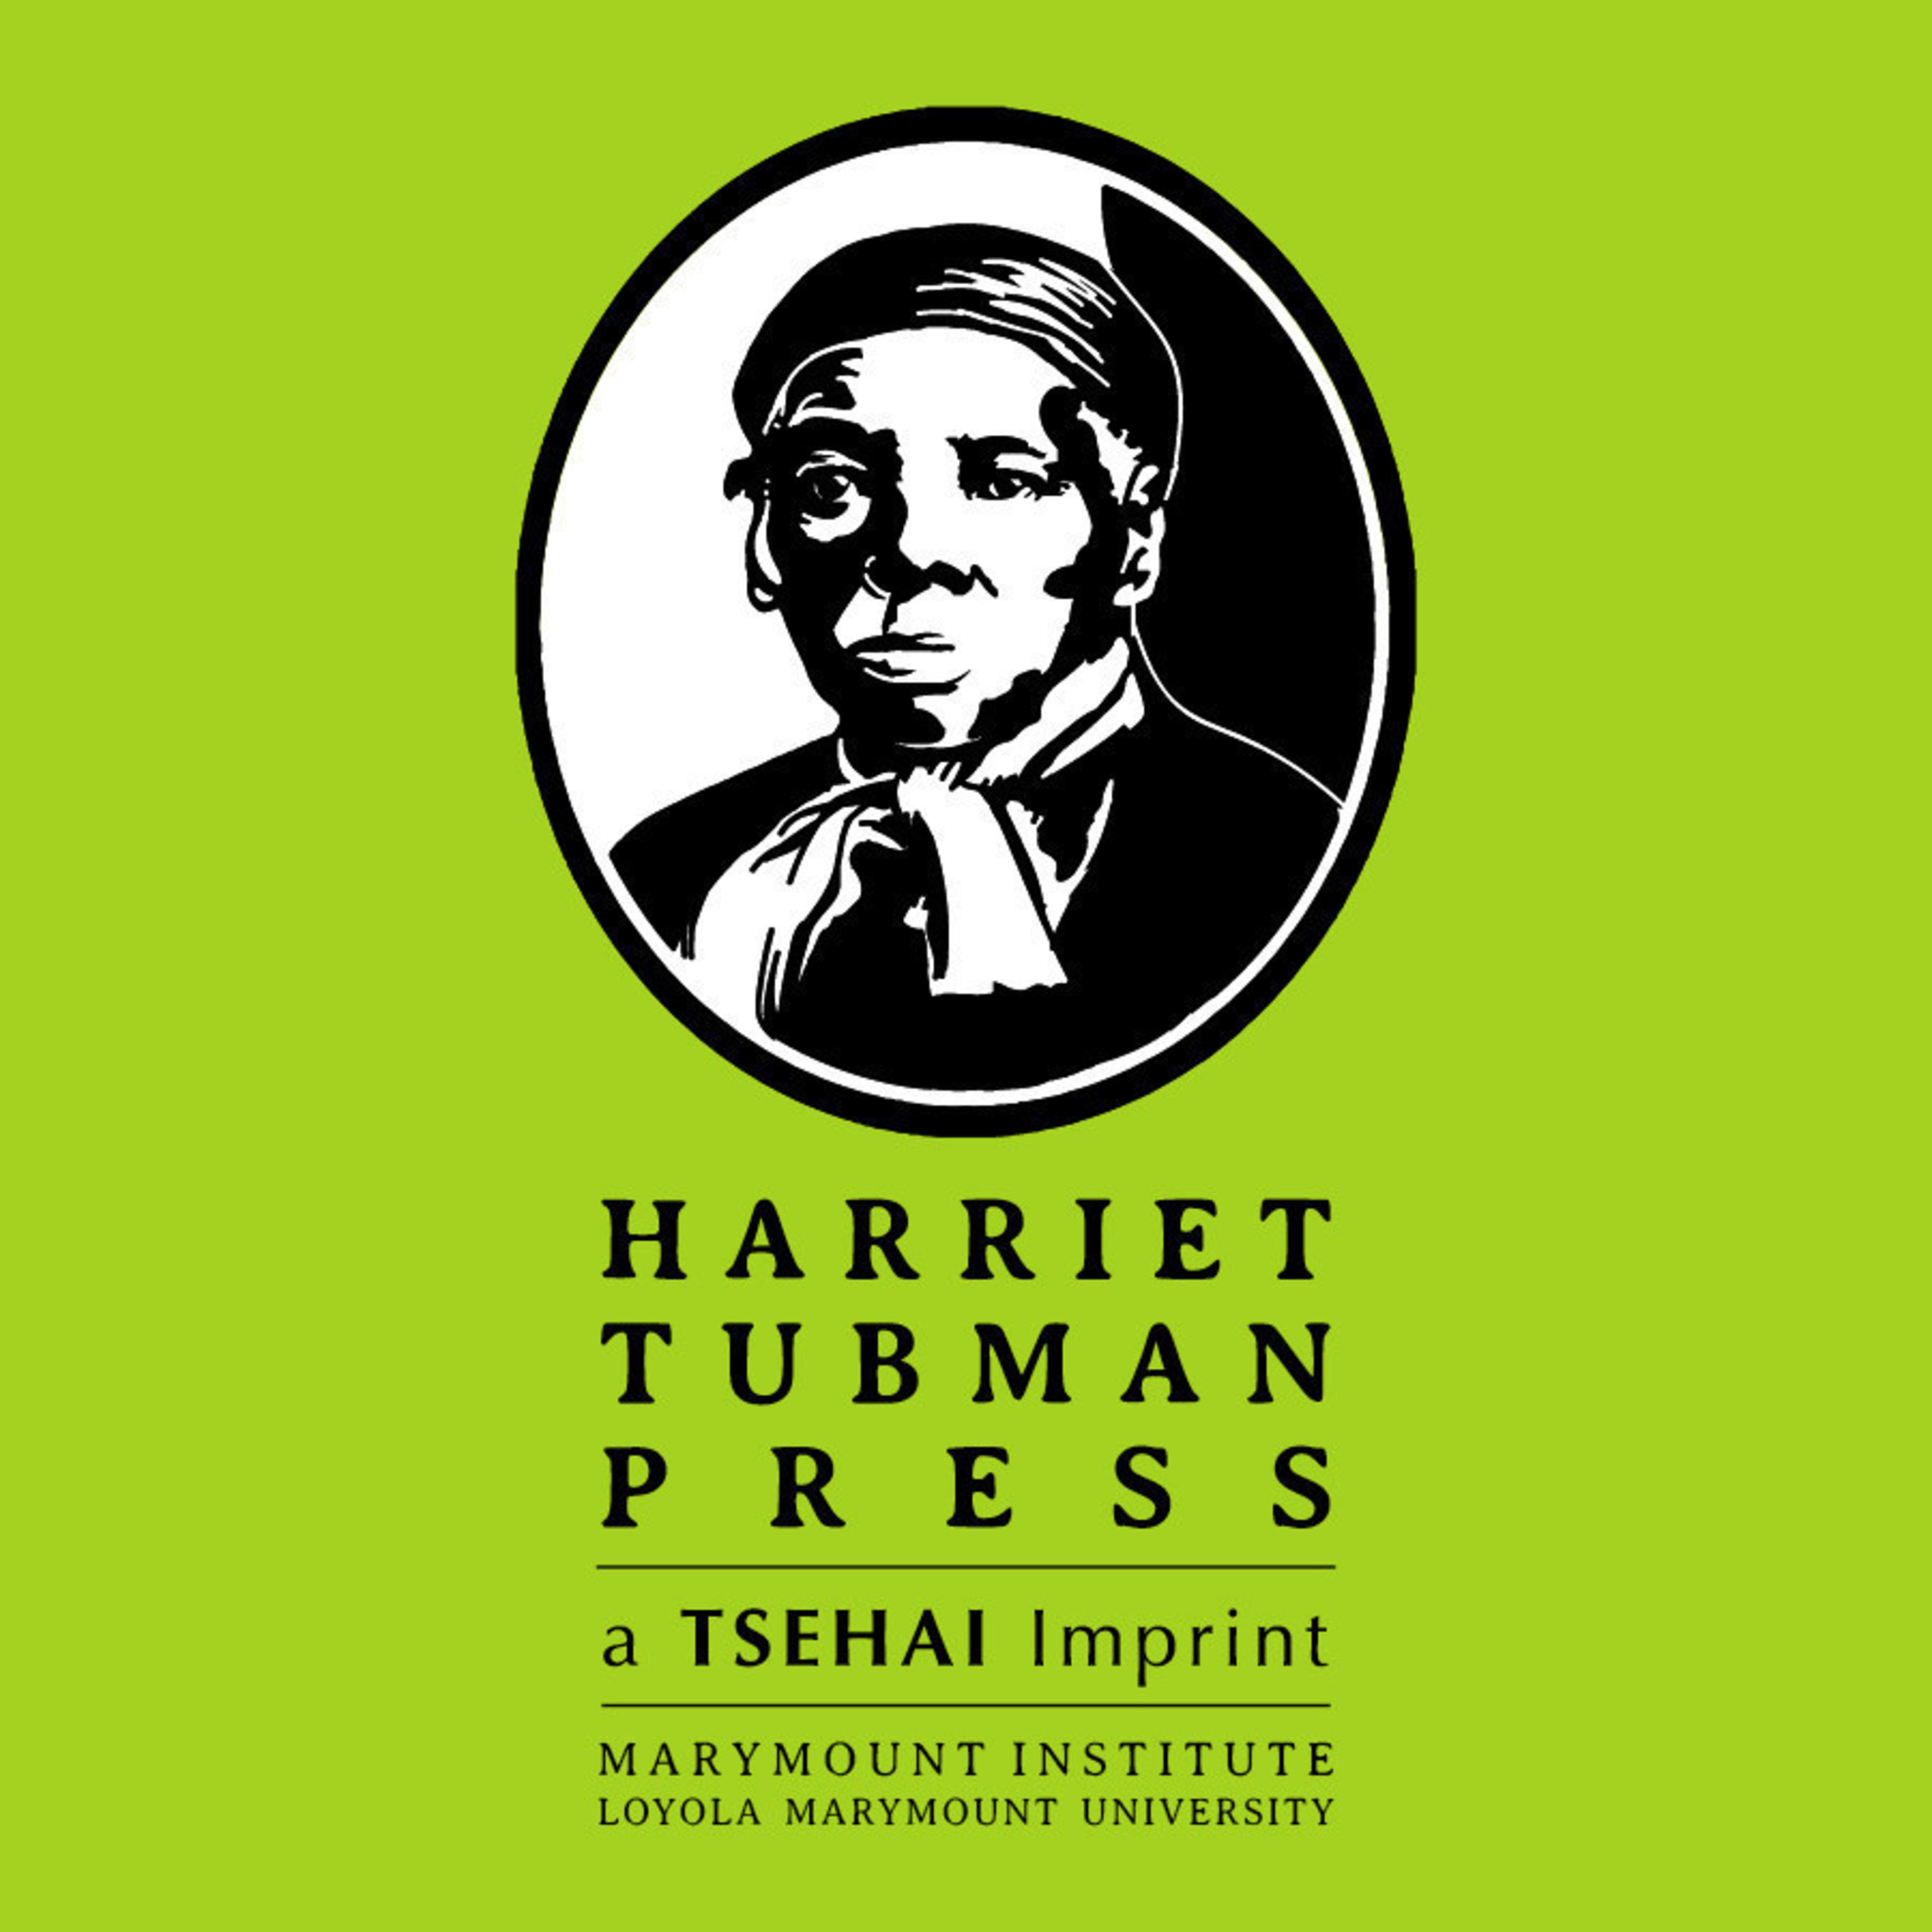 LMU's TSEHAI Publishers Launch Harriet Tubman Press for African-American Literature